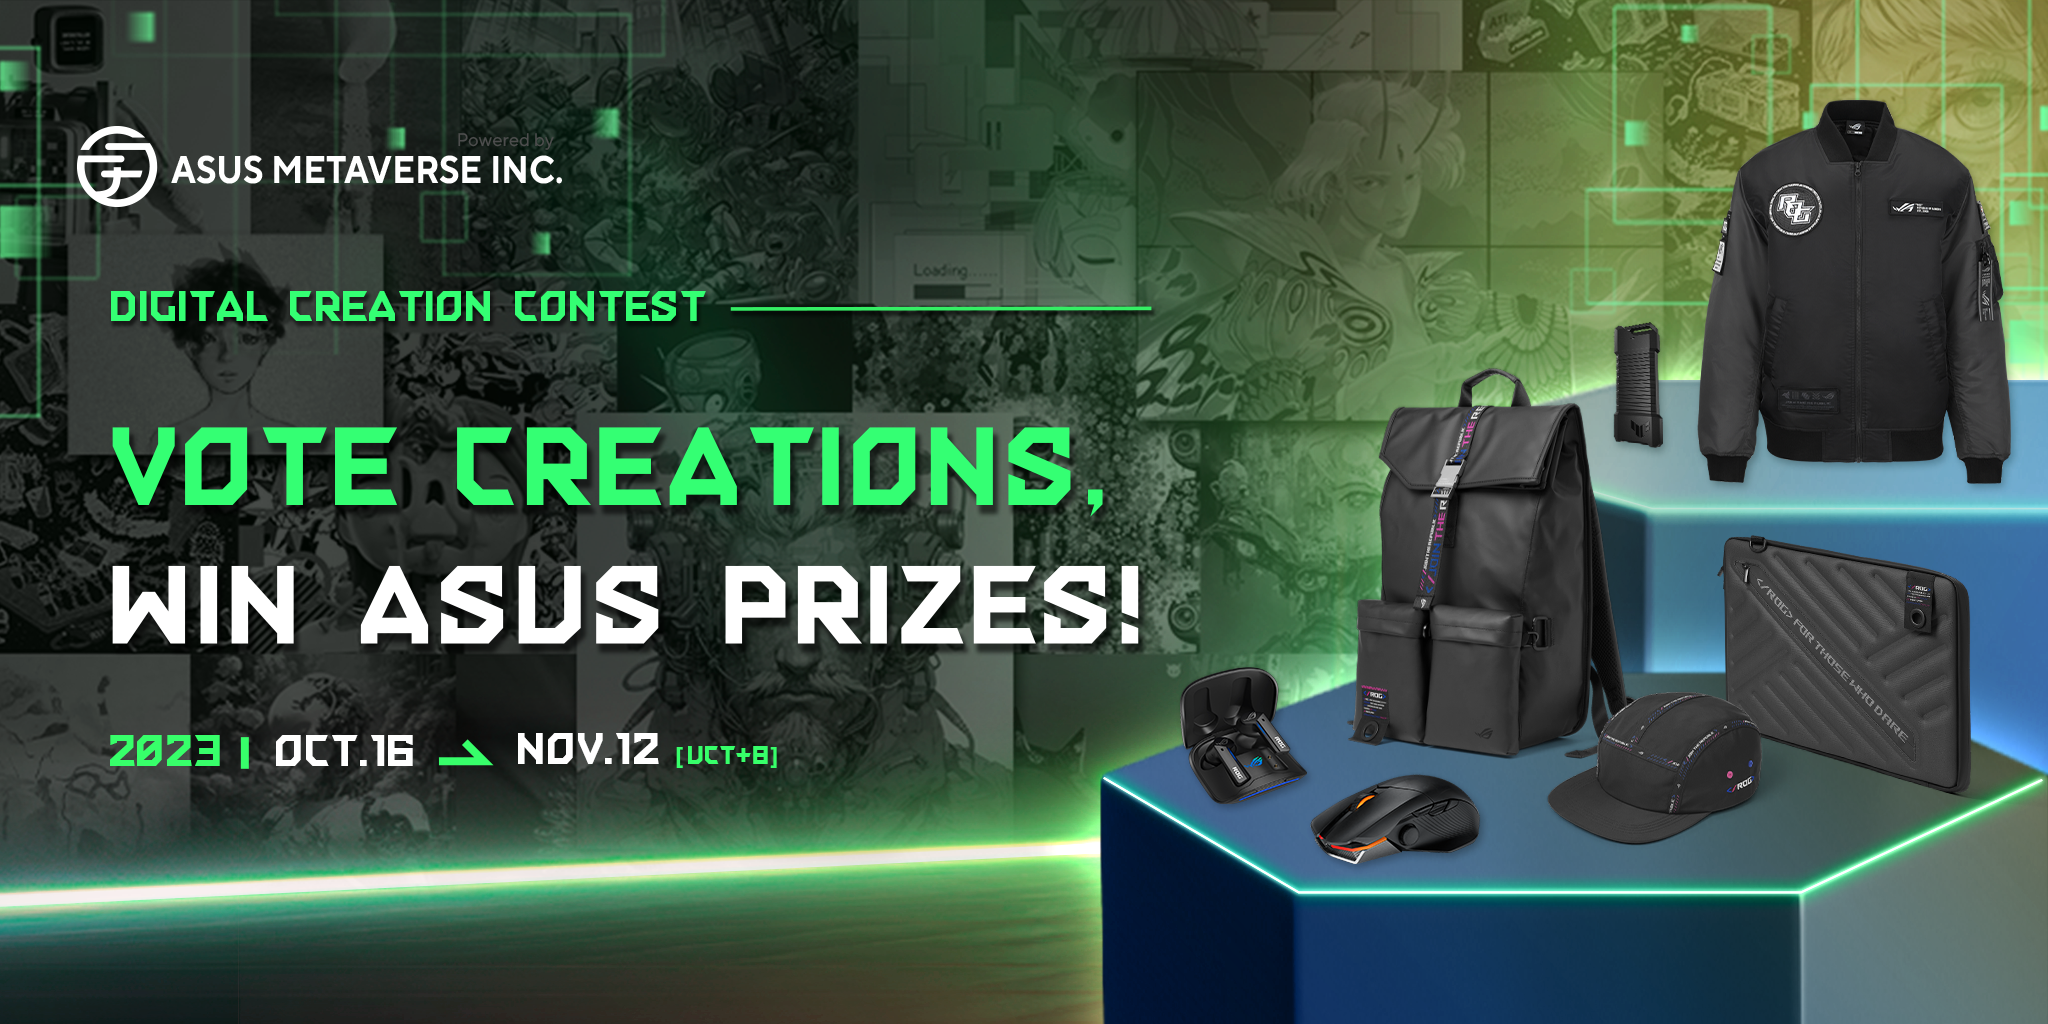 Voting begins in ASUS digital creation contest – and submission deadline extended